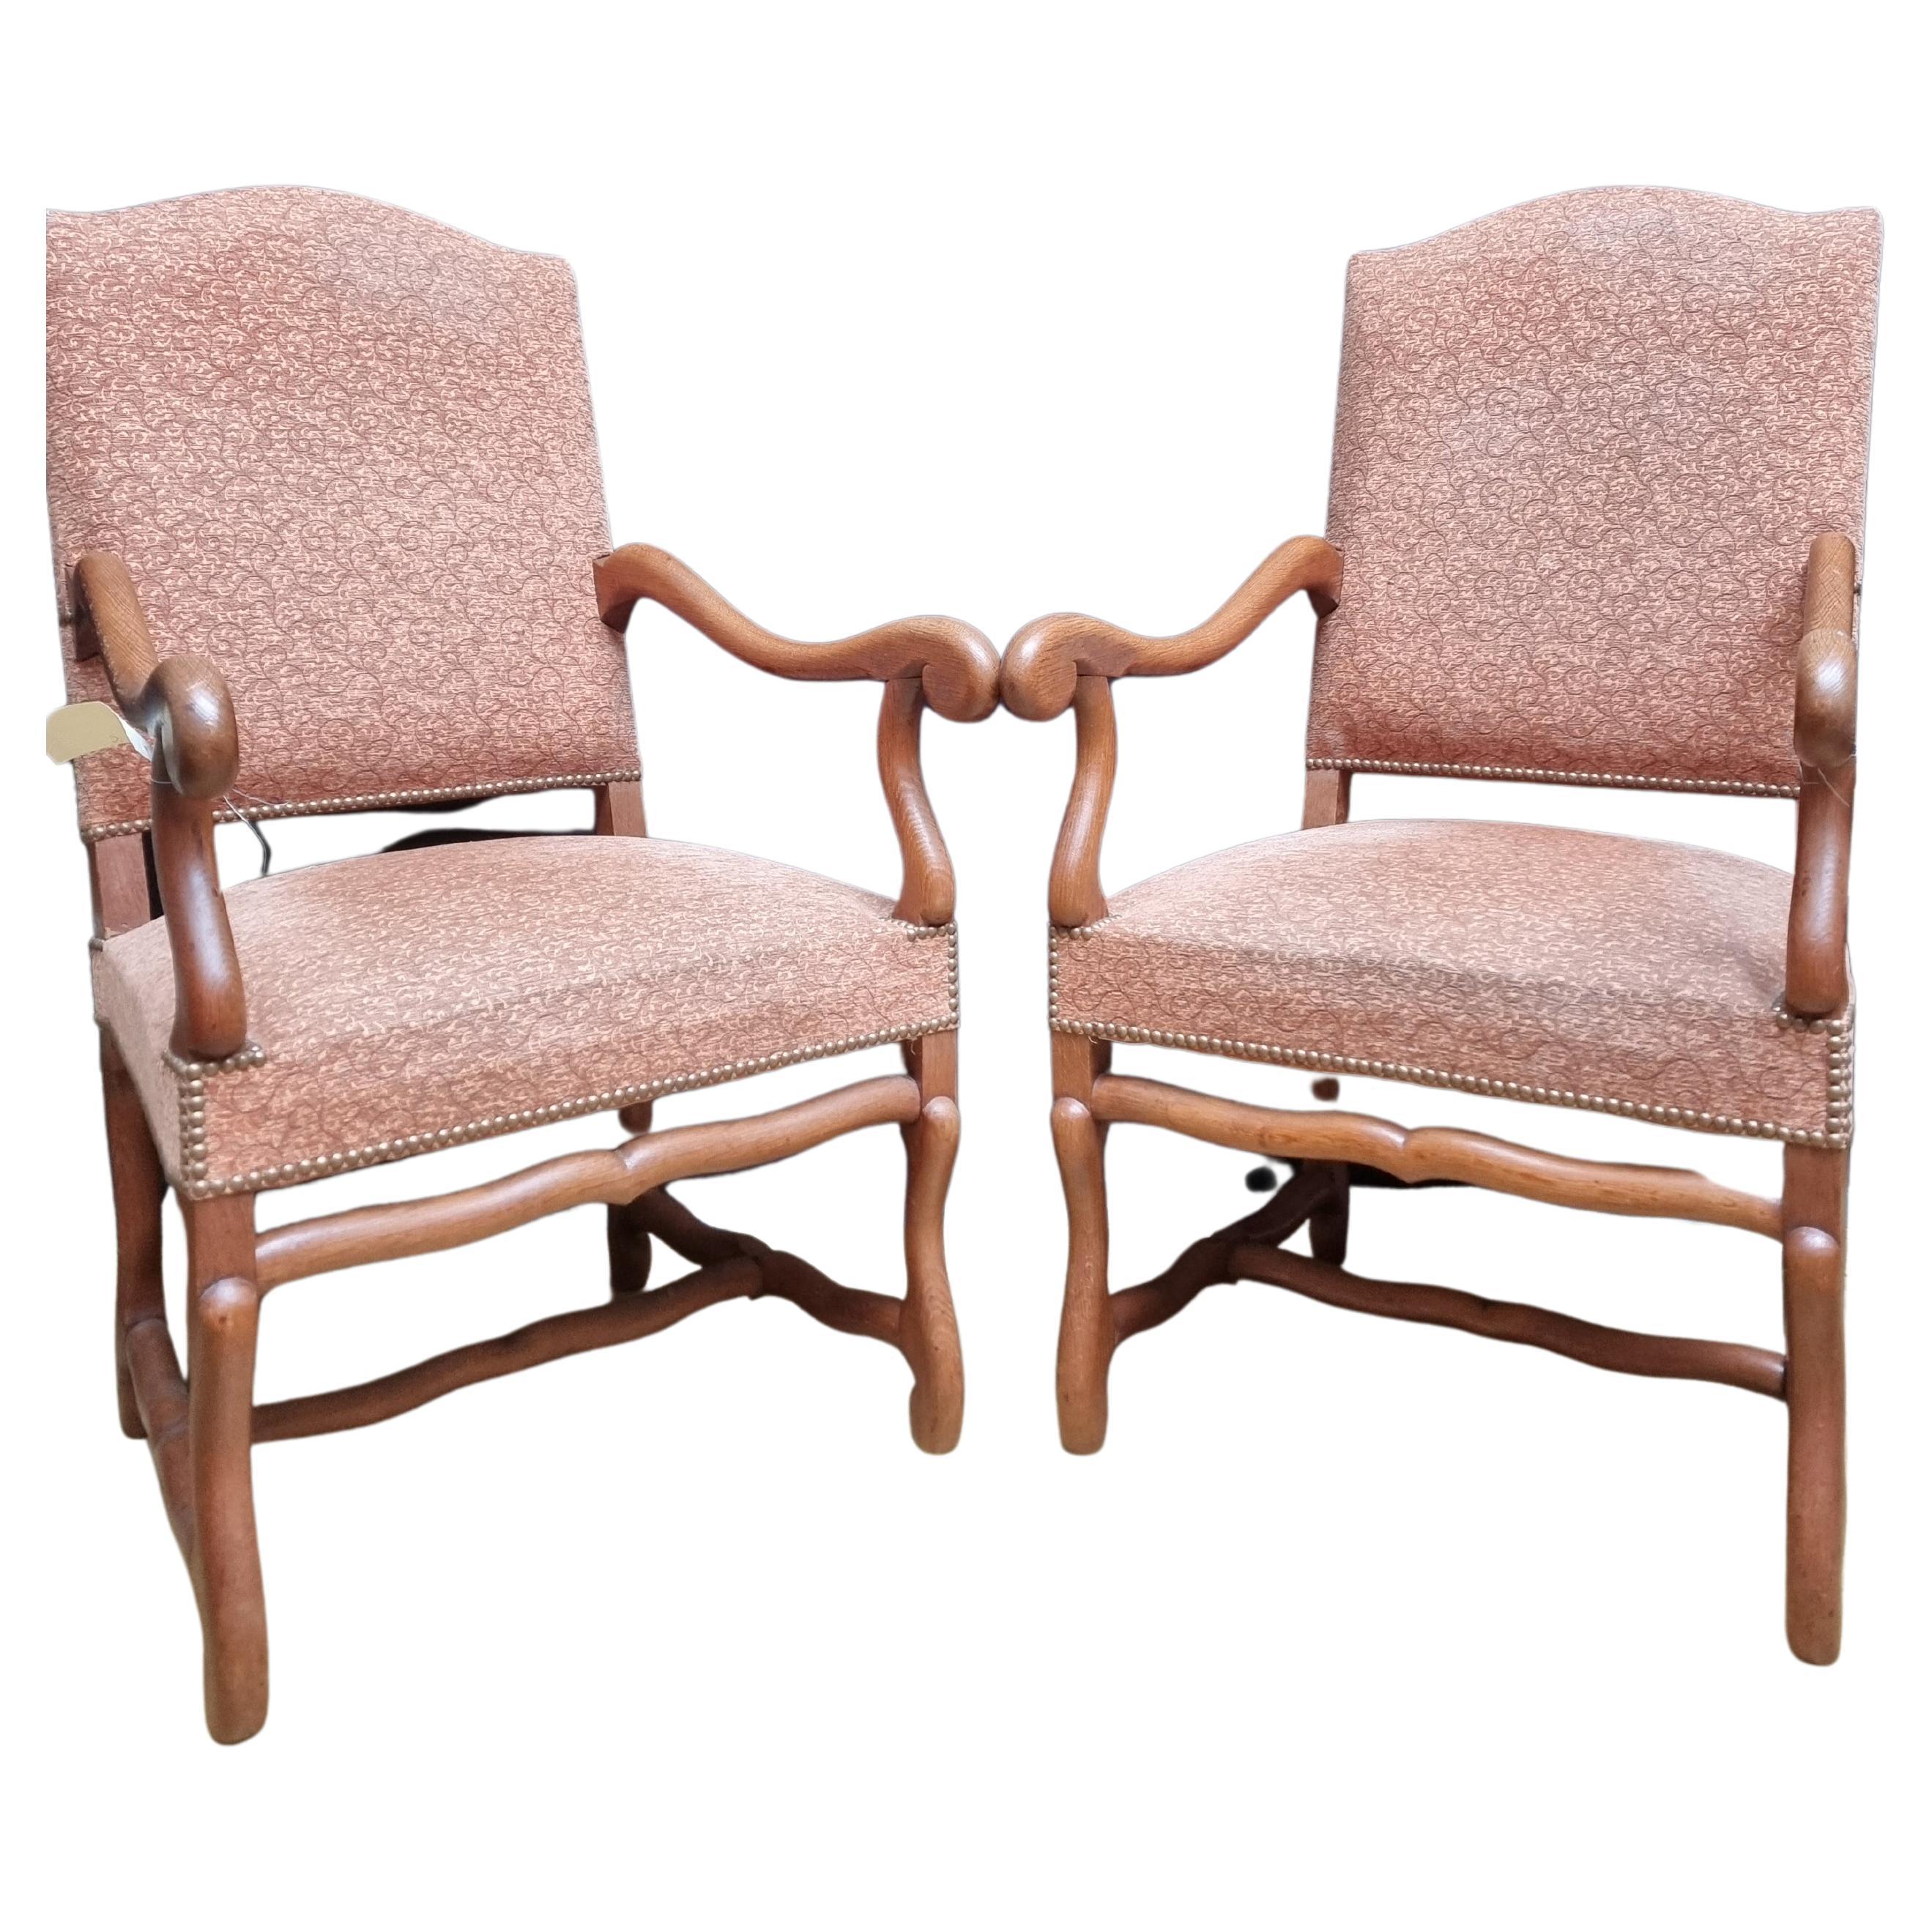 Pair of French Louis XIII Style Walnut Os de Mouton Chairs with Scrolling Arms